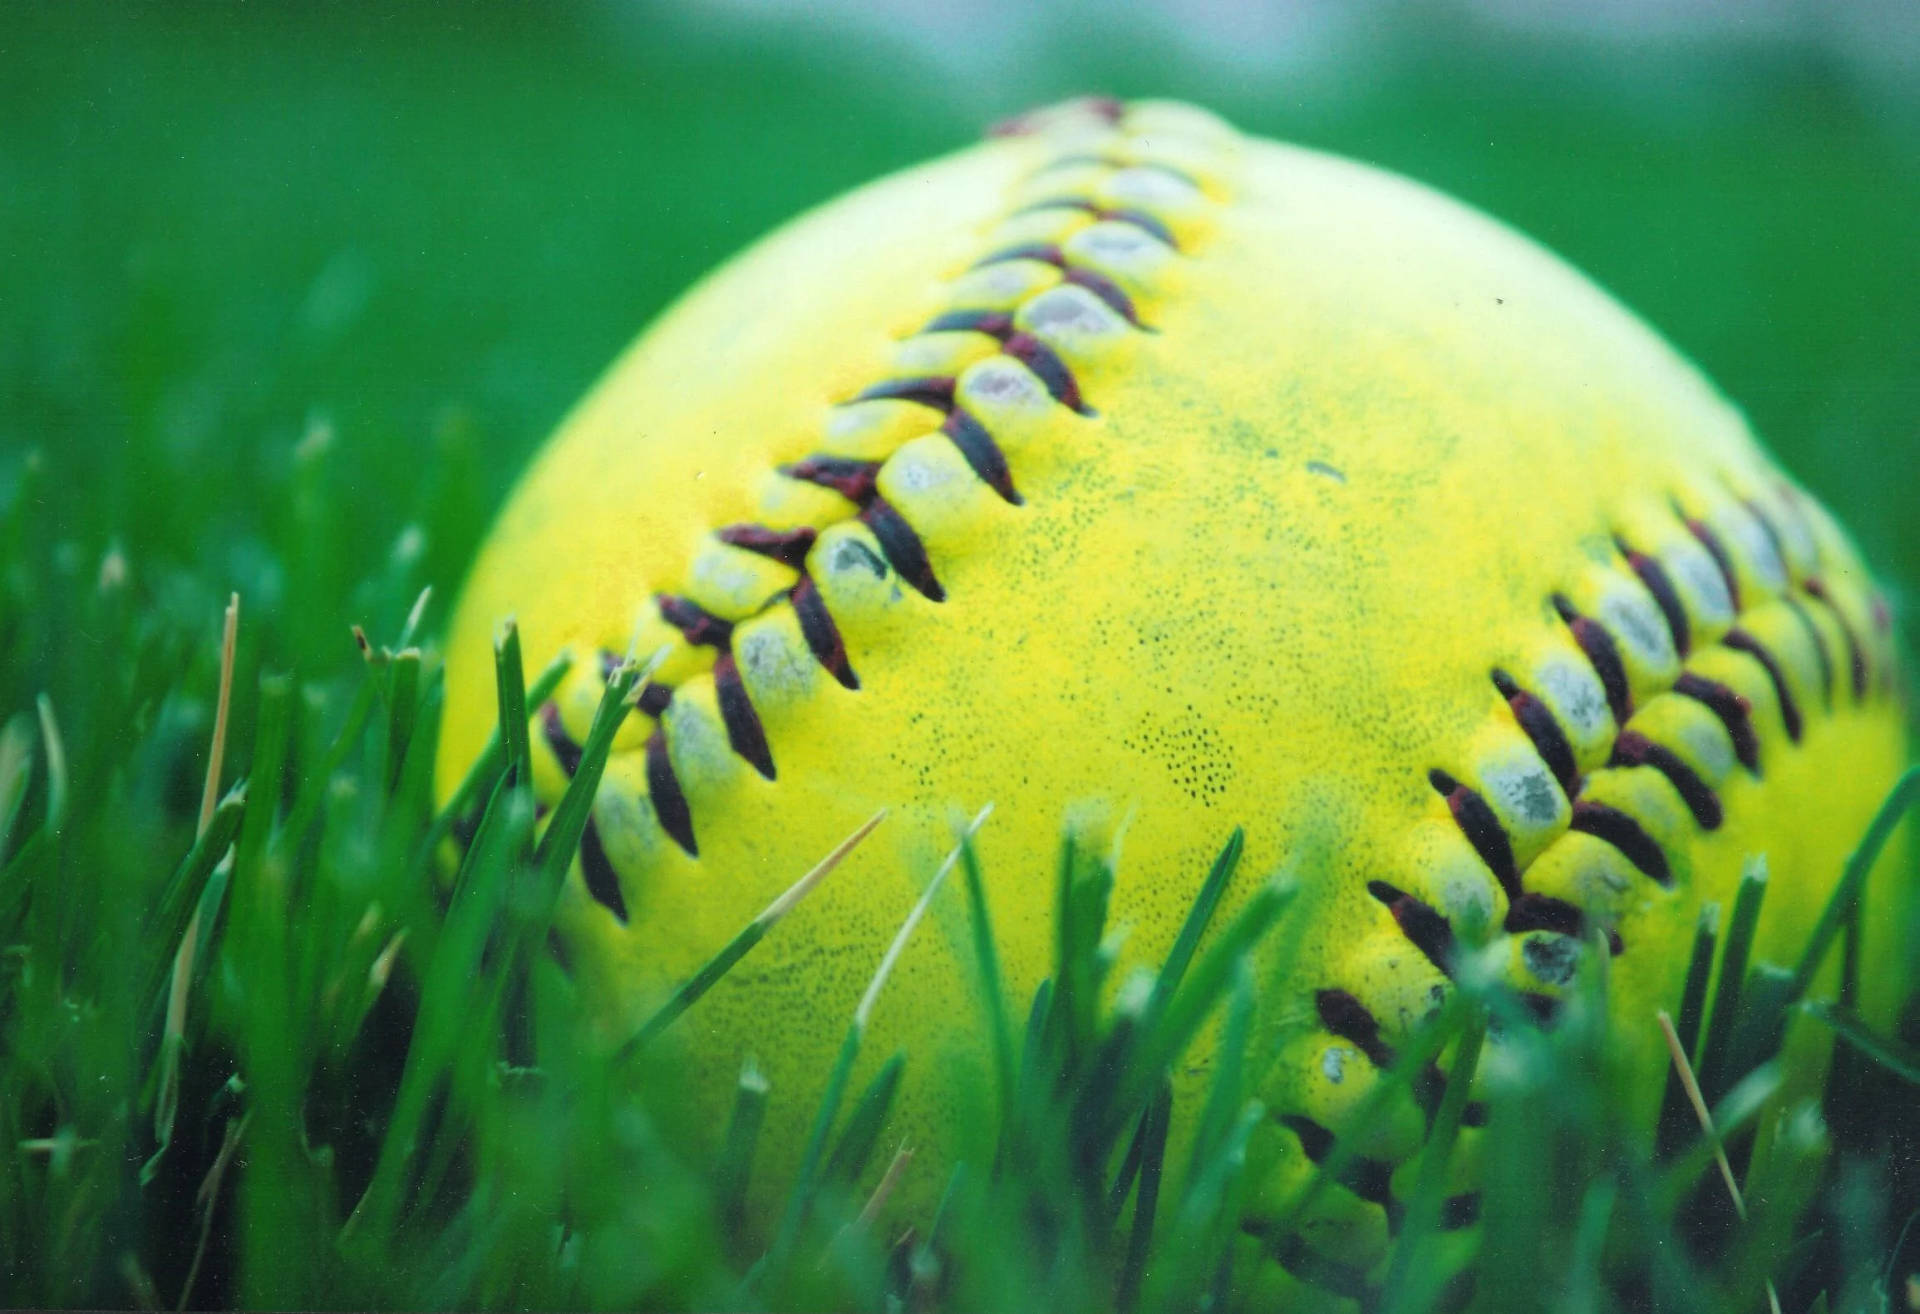 Cute Softball On The Grass Background